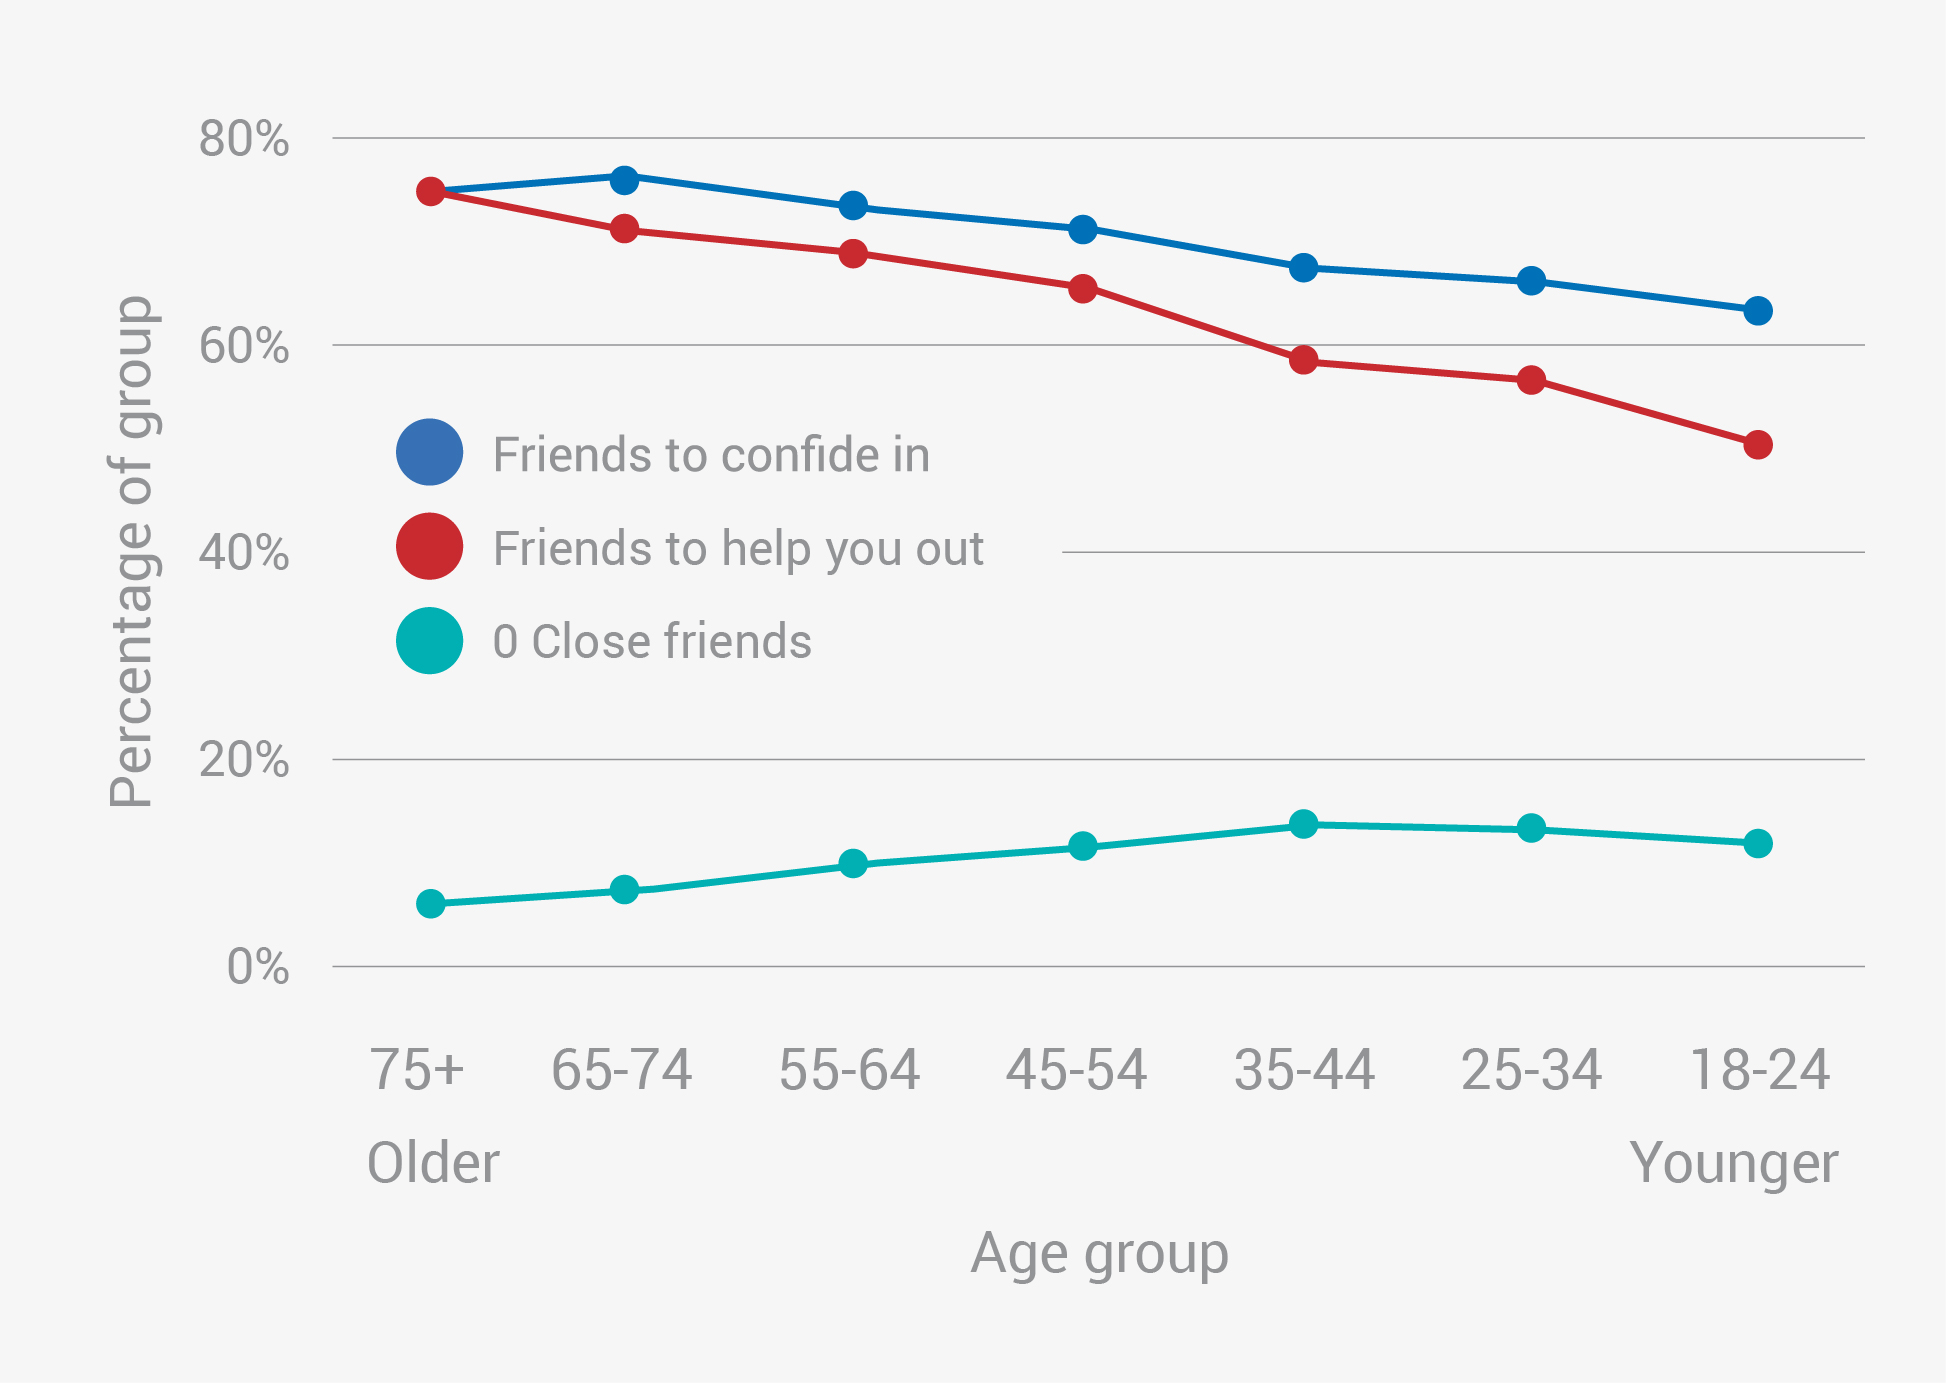 Younger adults are less likely to have friends to confide in or help them out